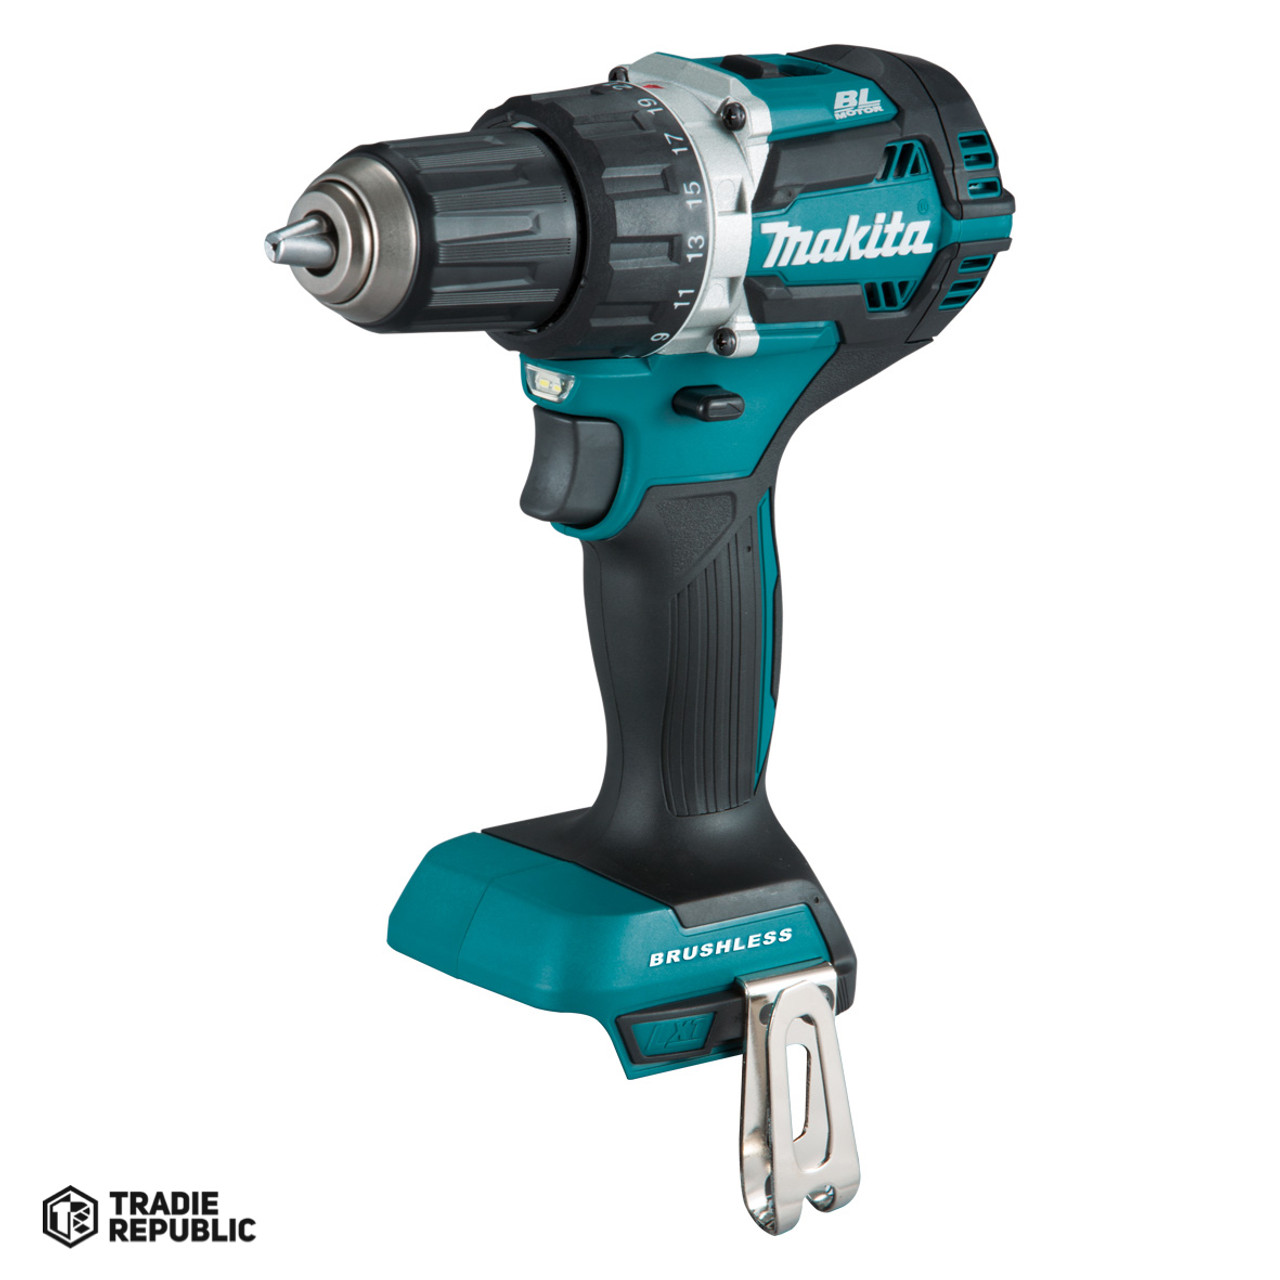 DDF484Z Makita 18V LXT  Compact Brushless  13mm Driver-Drill, Tool Only